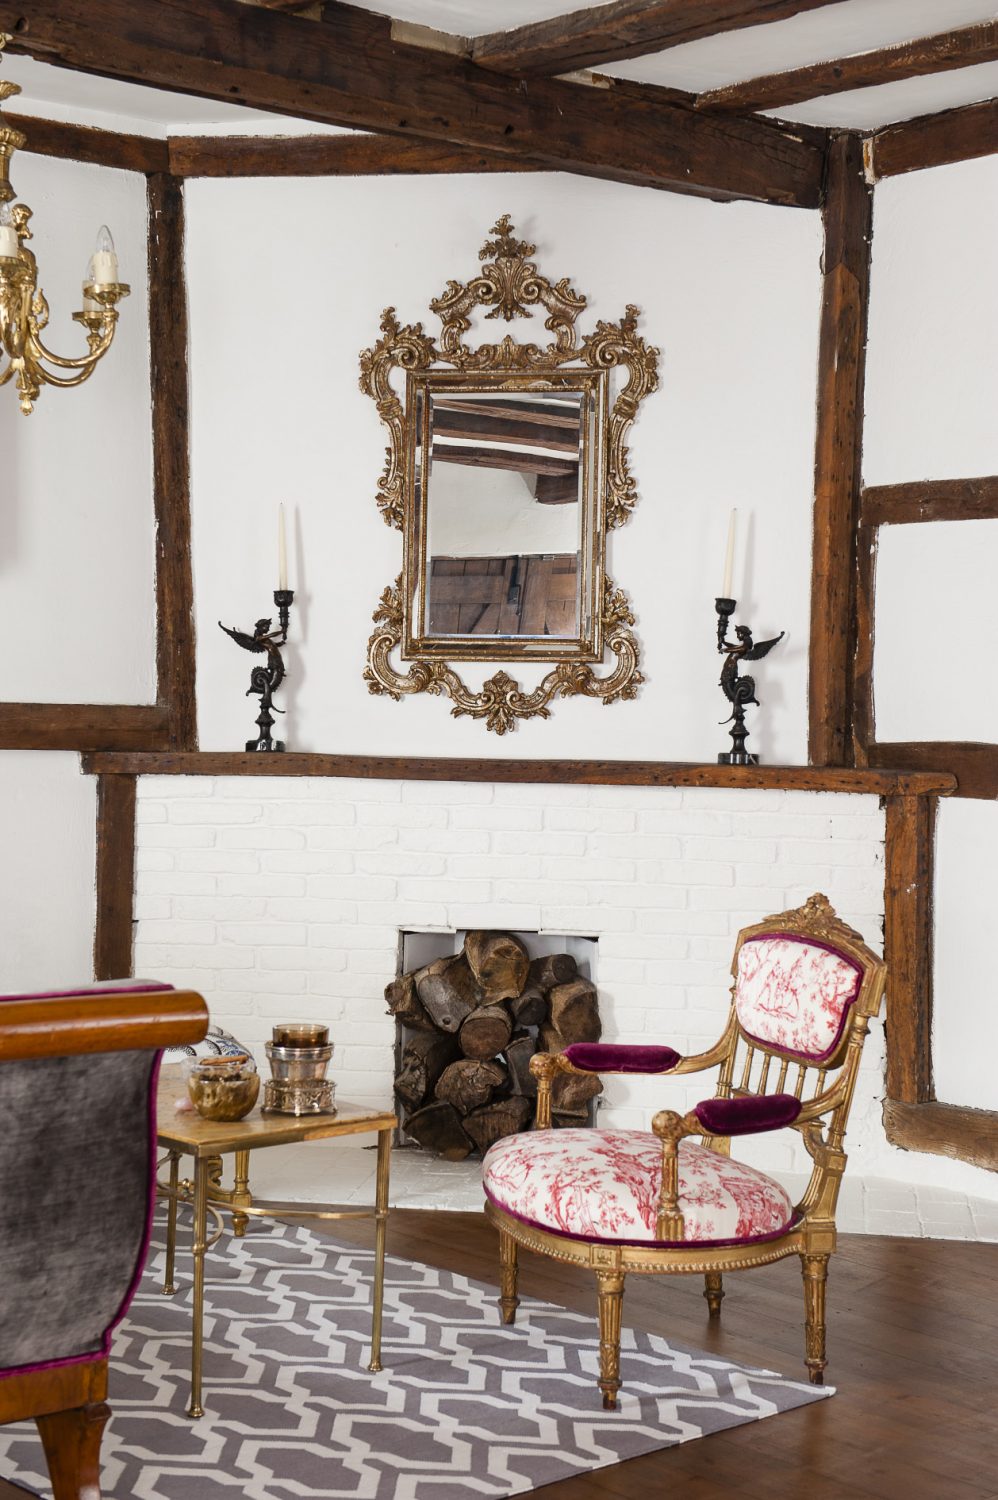 A Venetian rococo mirror is mounted above the painted brickwork of the fireplace